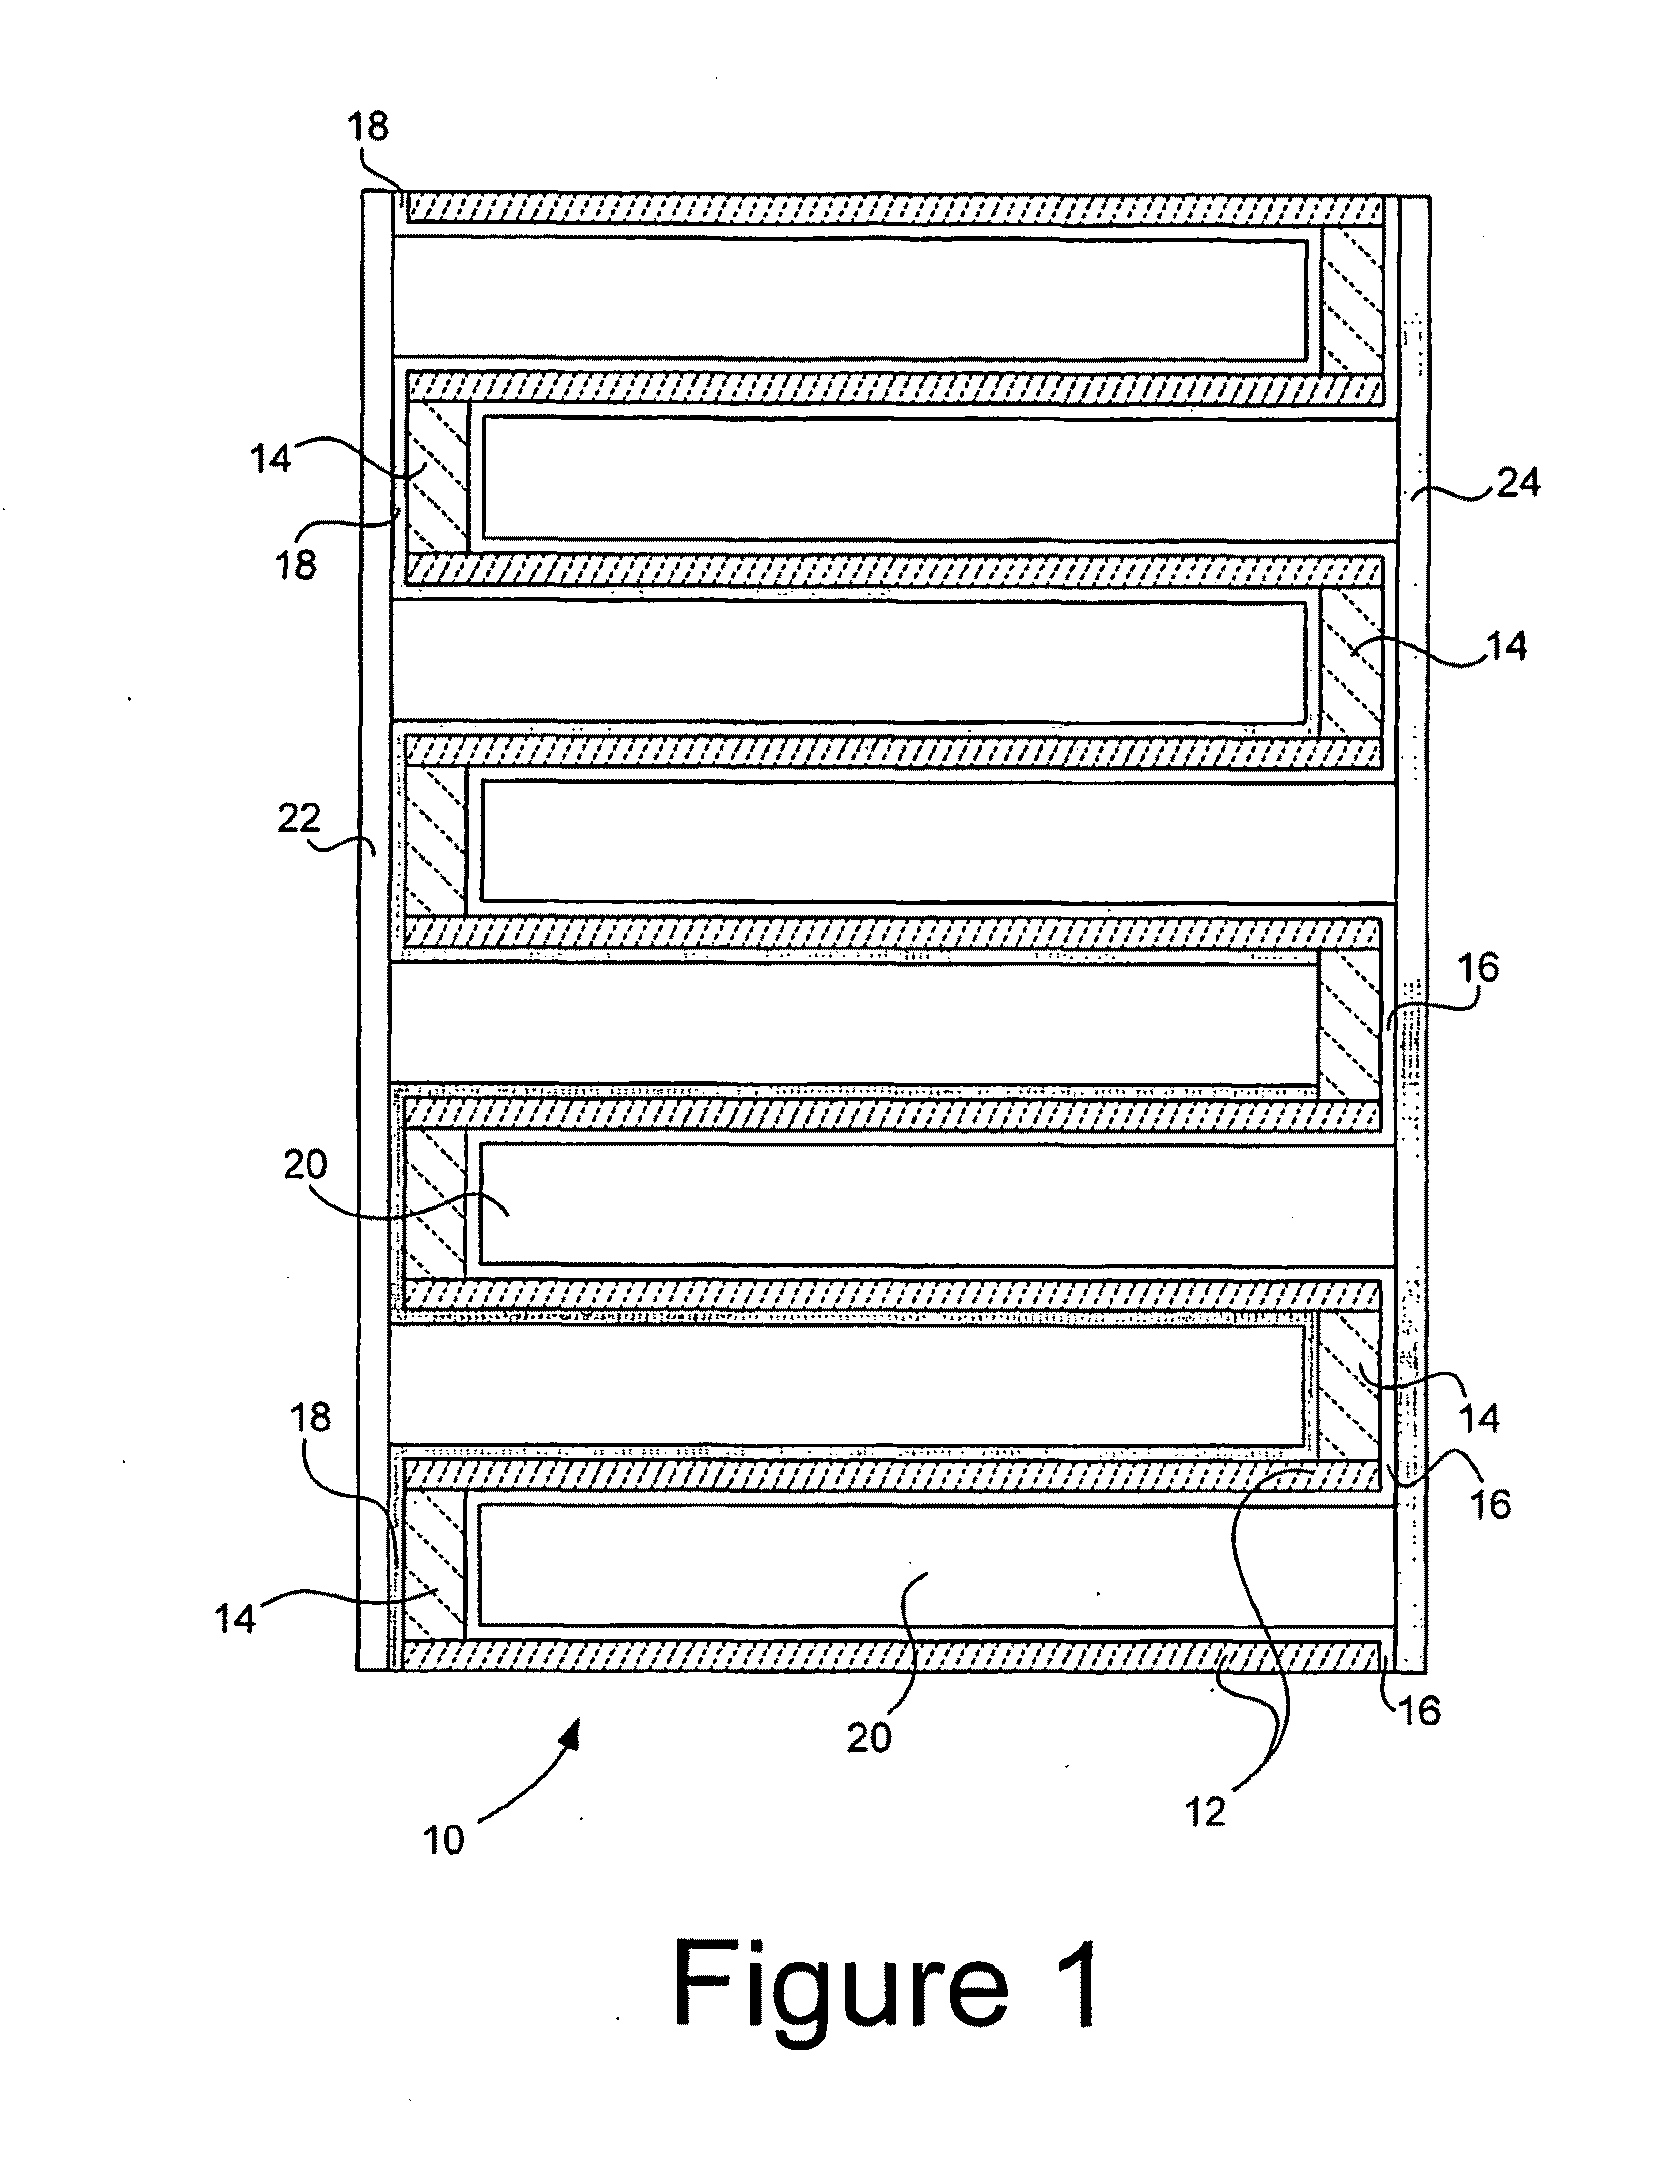 Cellular Honeycomb Ultracapacitors and Hybrid Capacitors and Methods for Producing